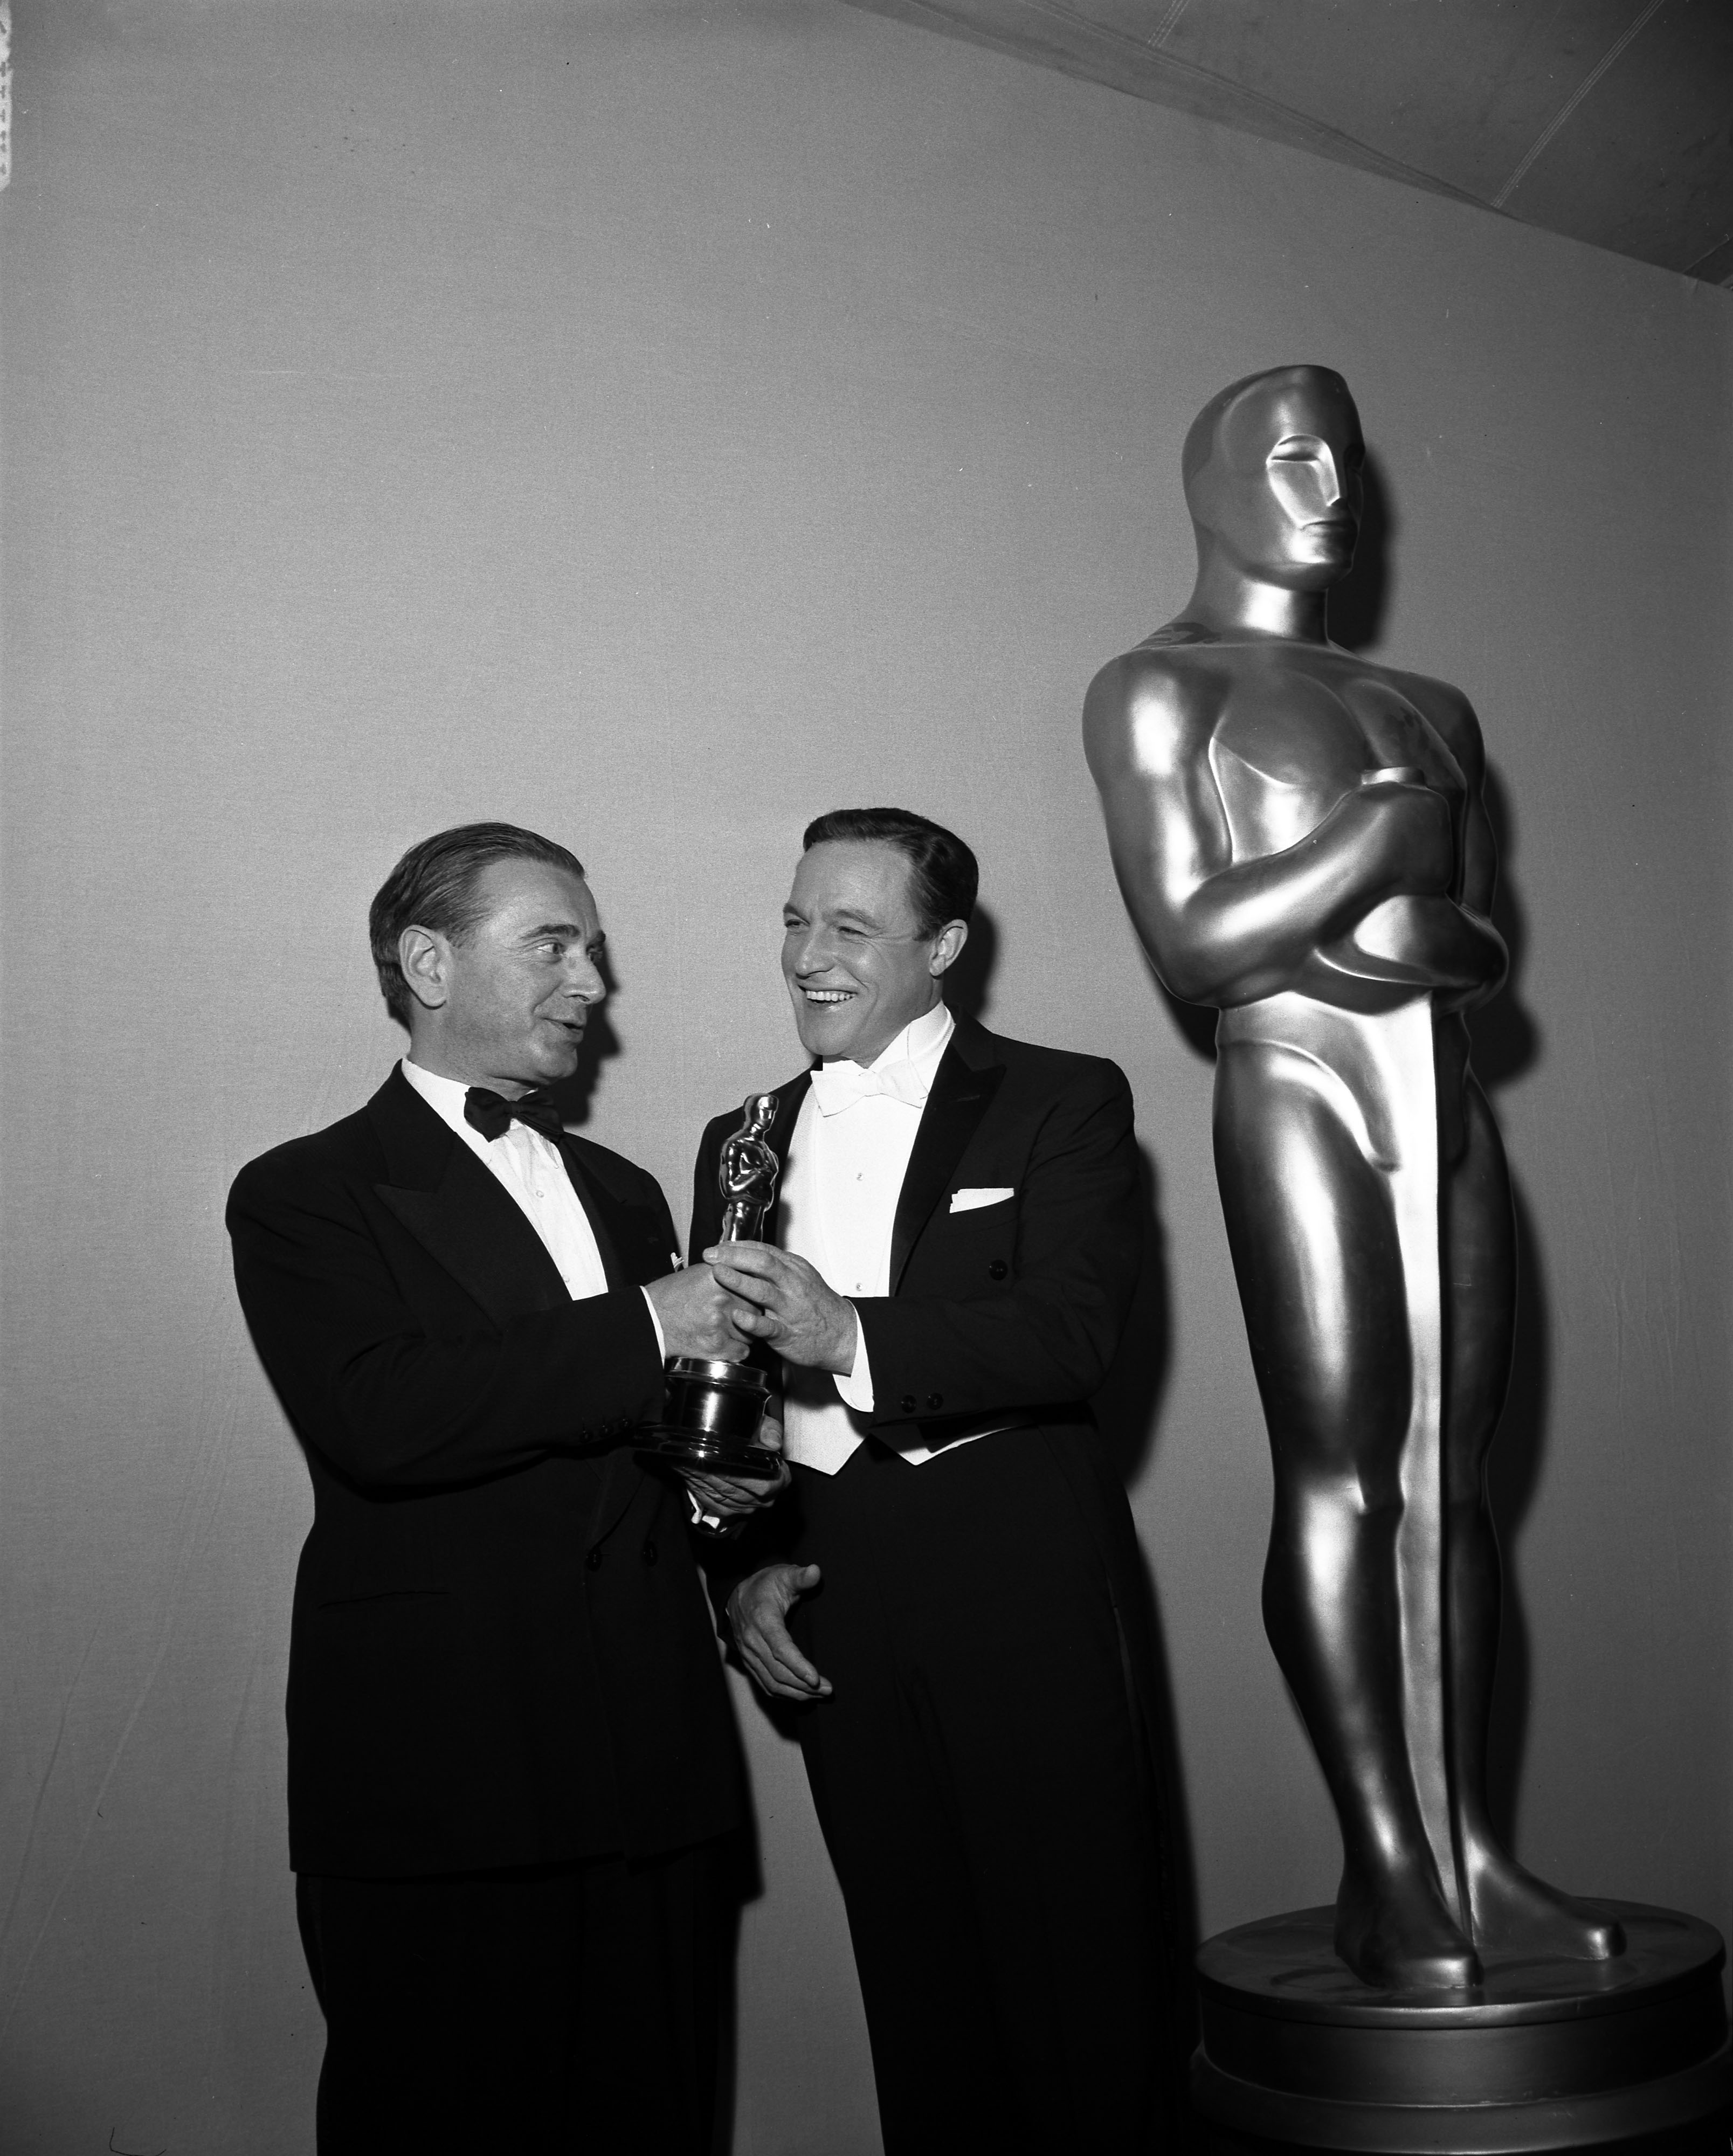 1960 | Oscars.org | Academy of Motion Picture Arts and Sciences3215 x 4000